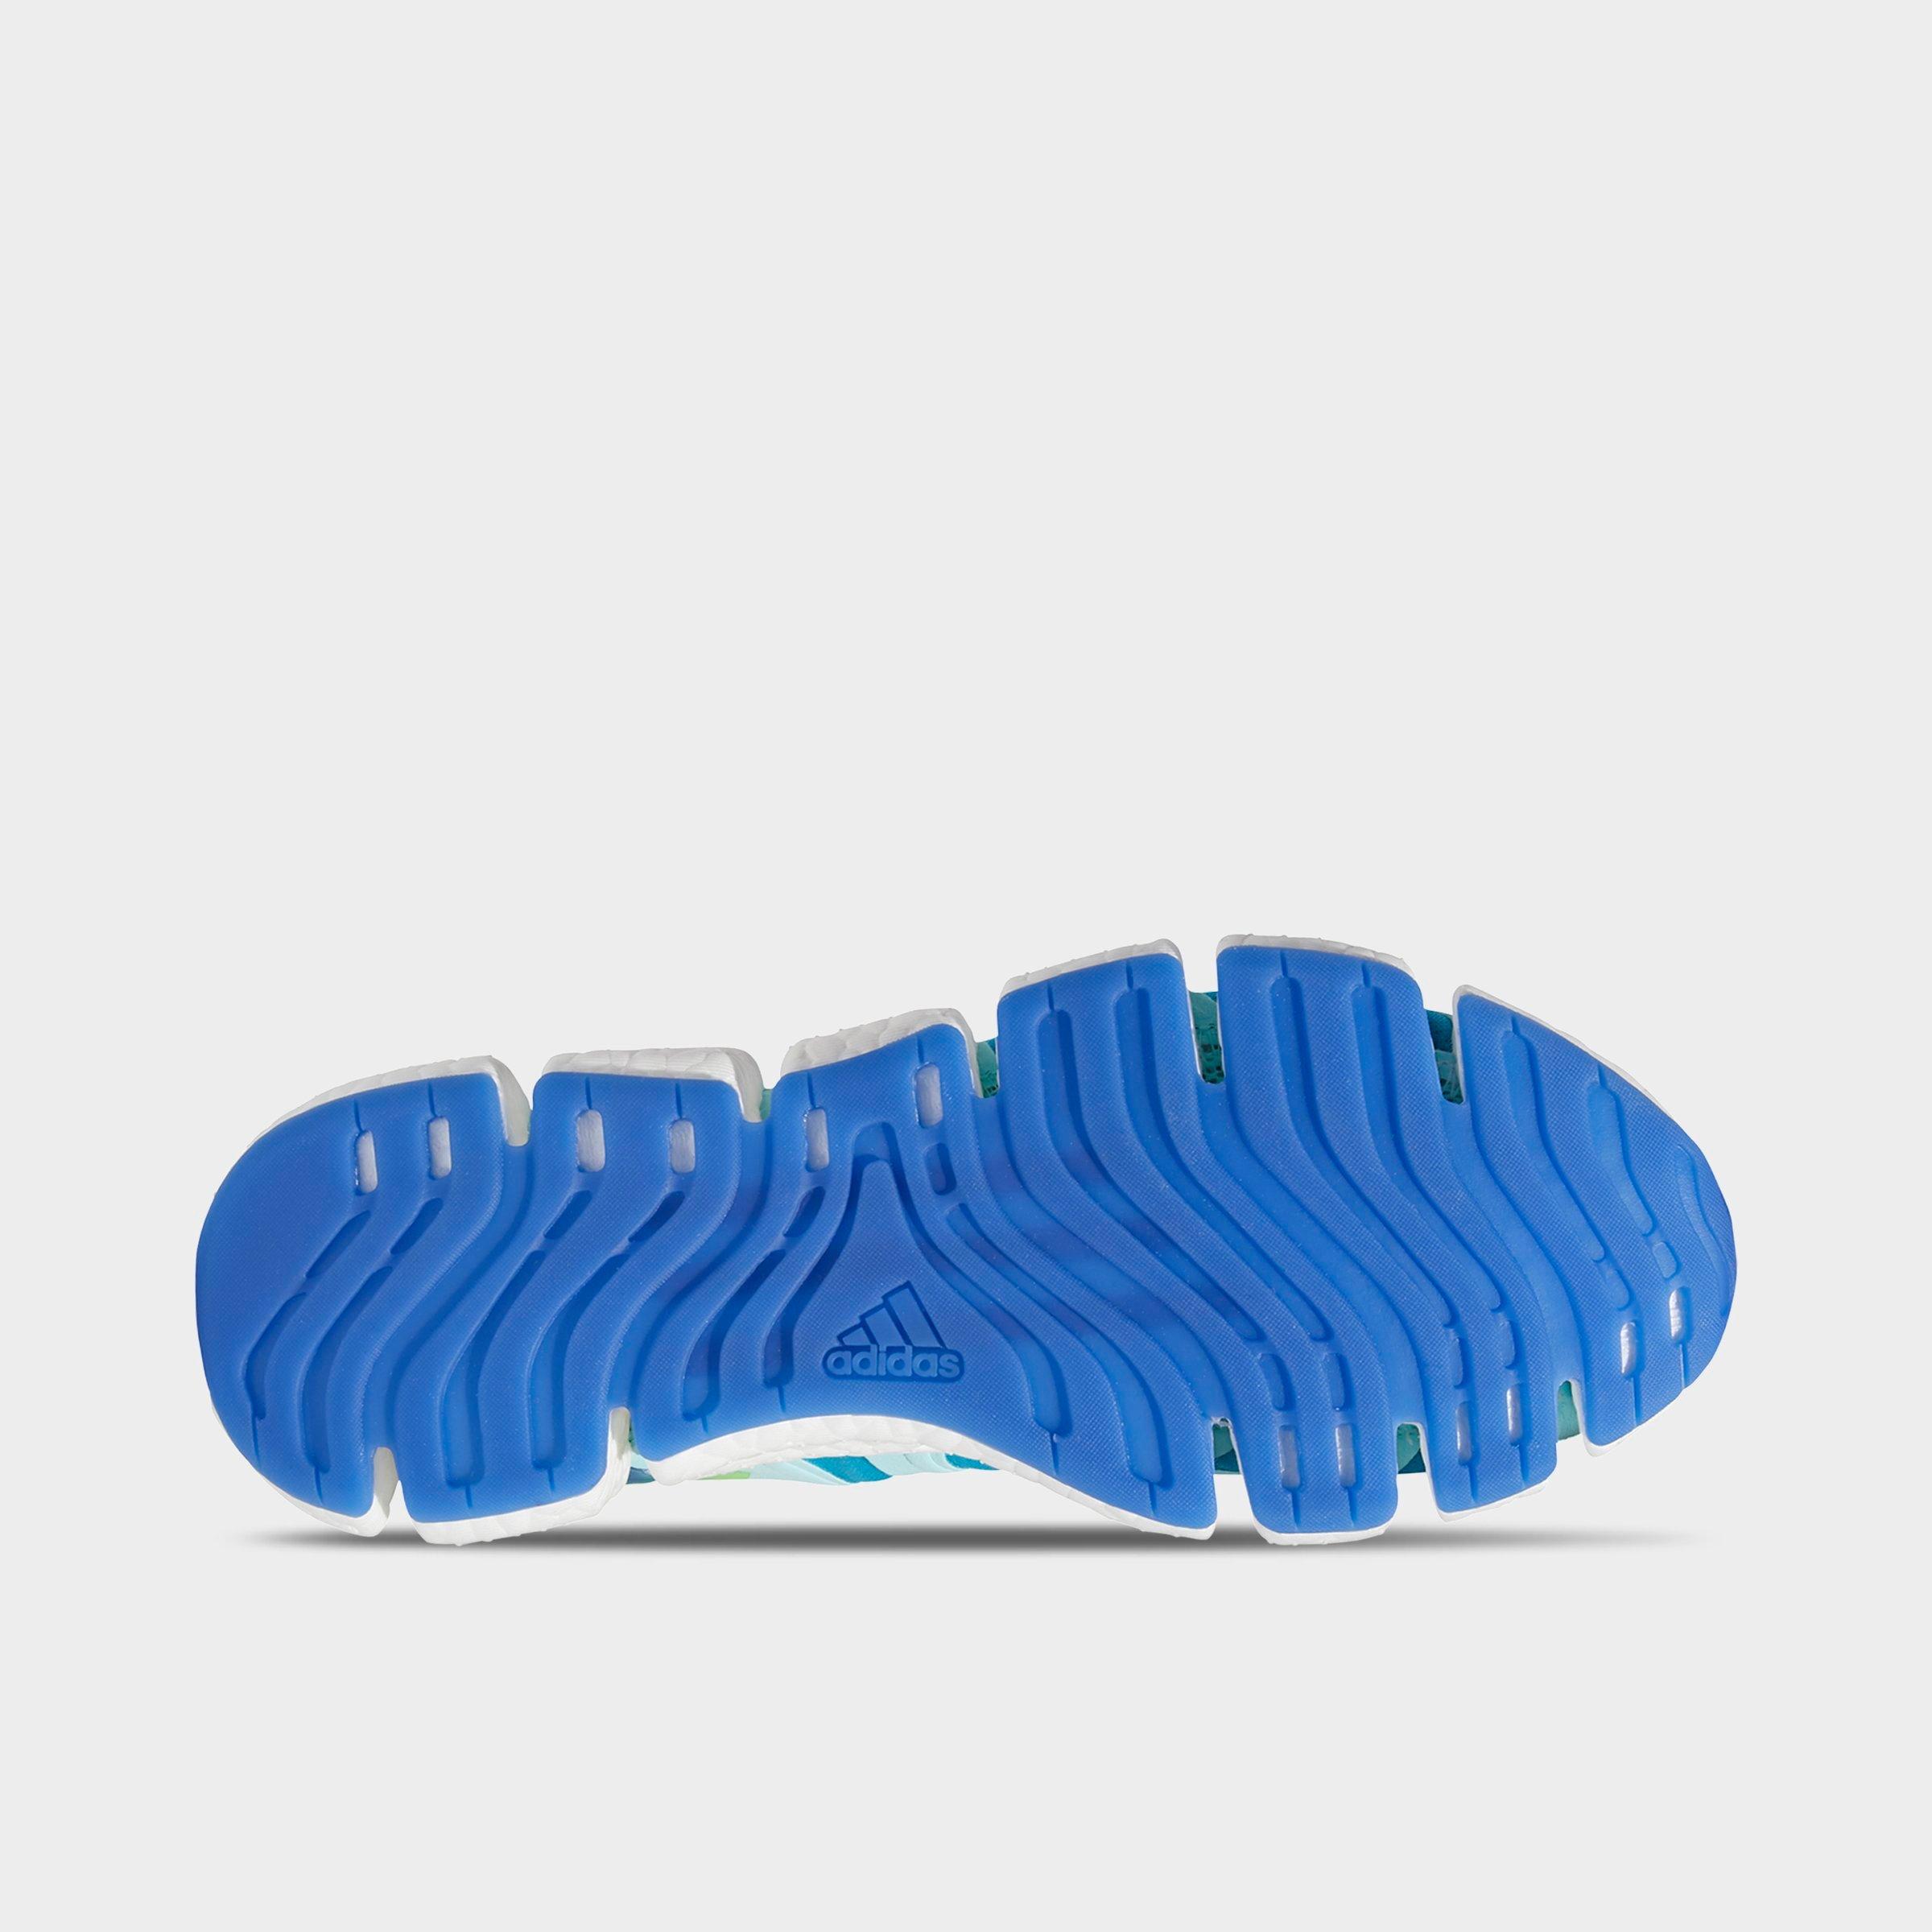 adidas climacool slippers